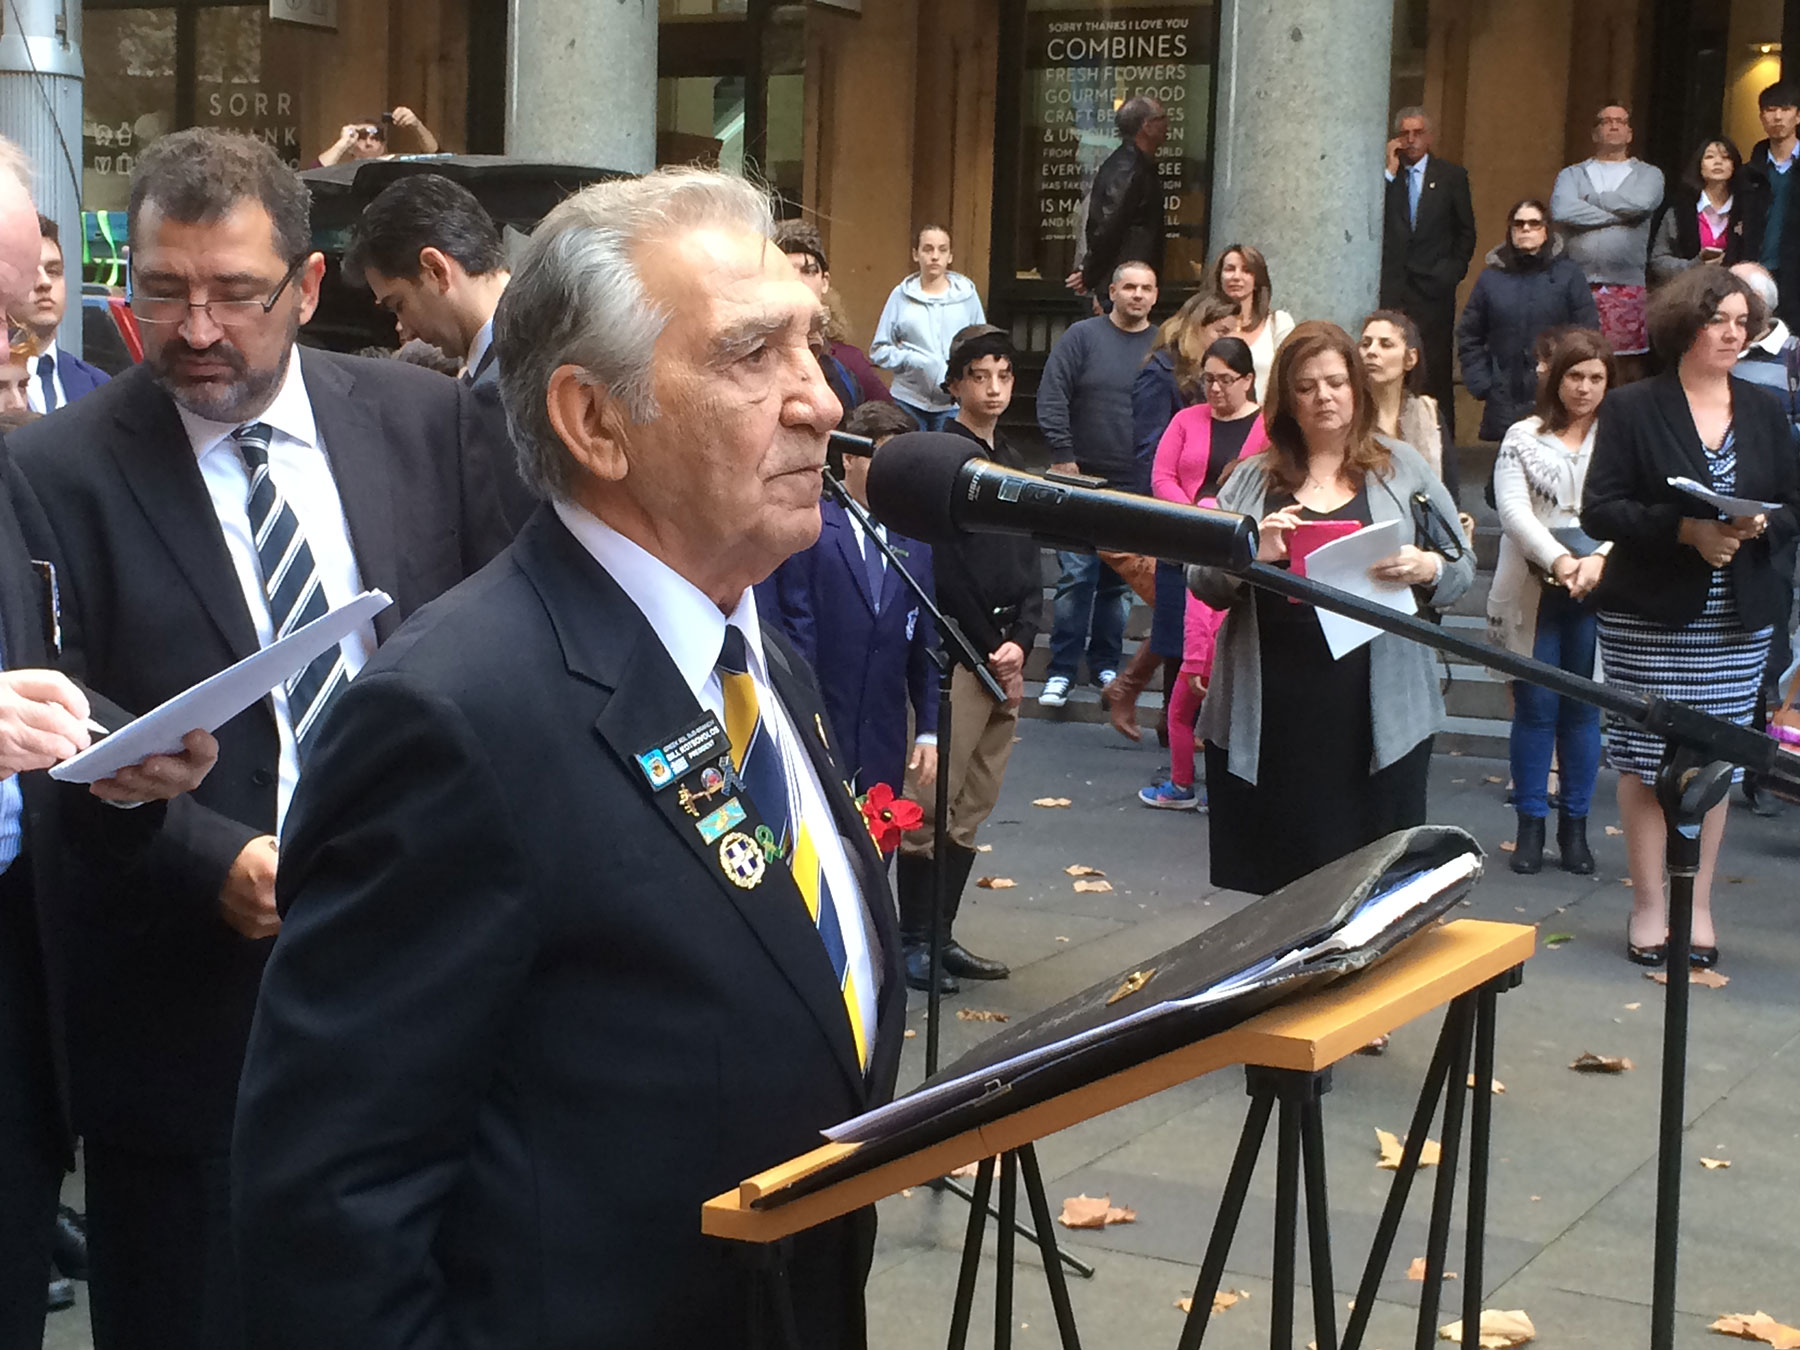 Martin Place Cenotaph Wreath Laying Ceremony. May 2015